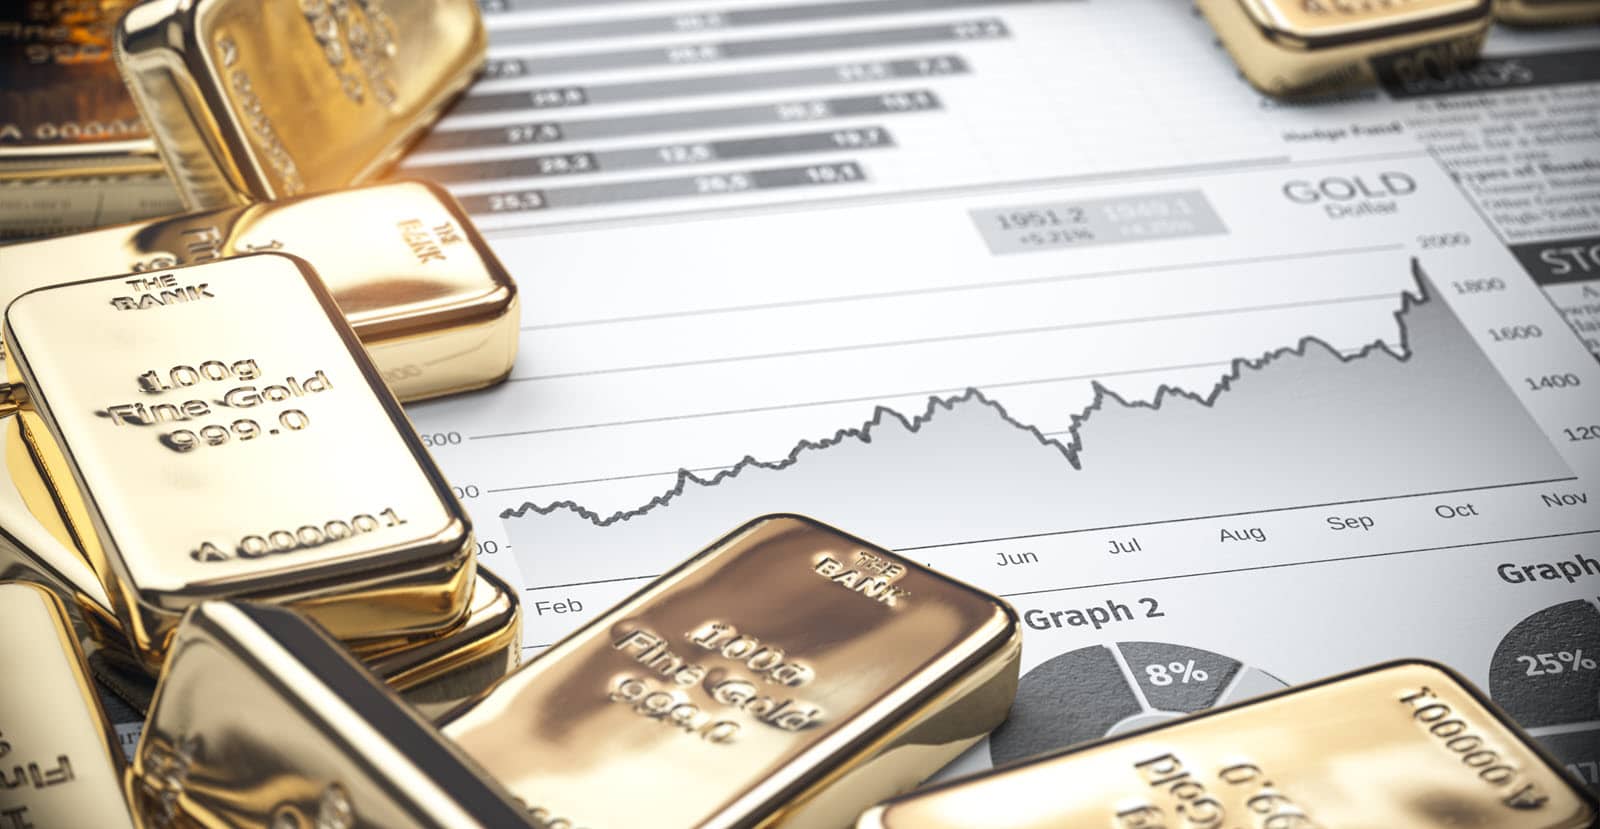 Gold bars on a newspaper. The paper displays a stock ticker graph of the value of gold.